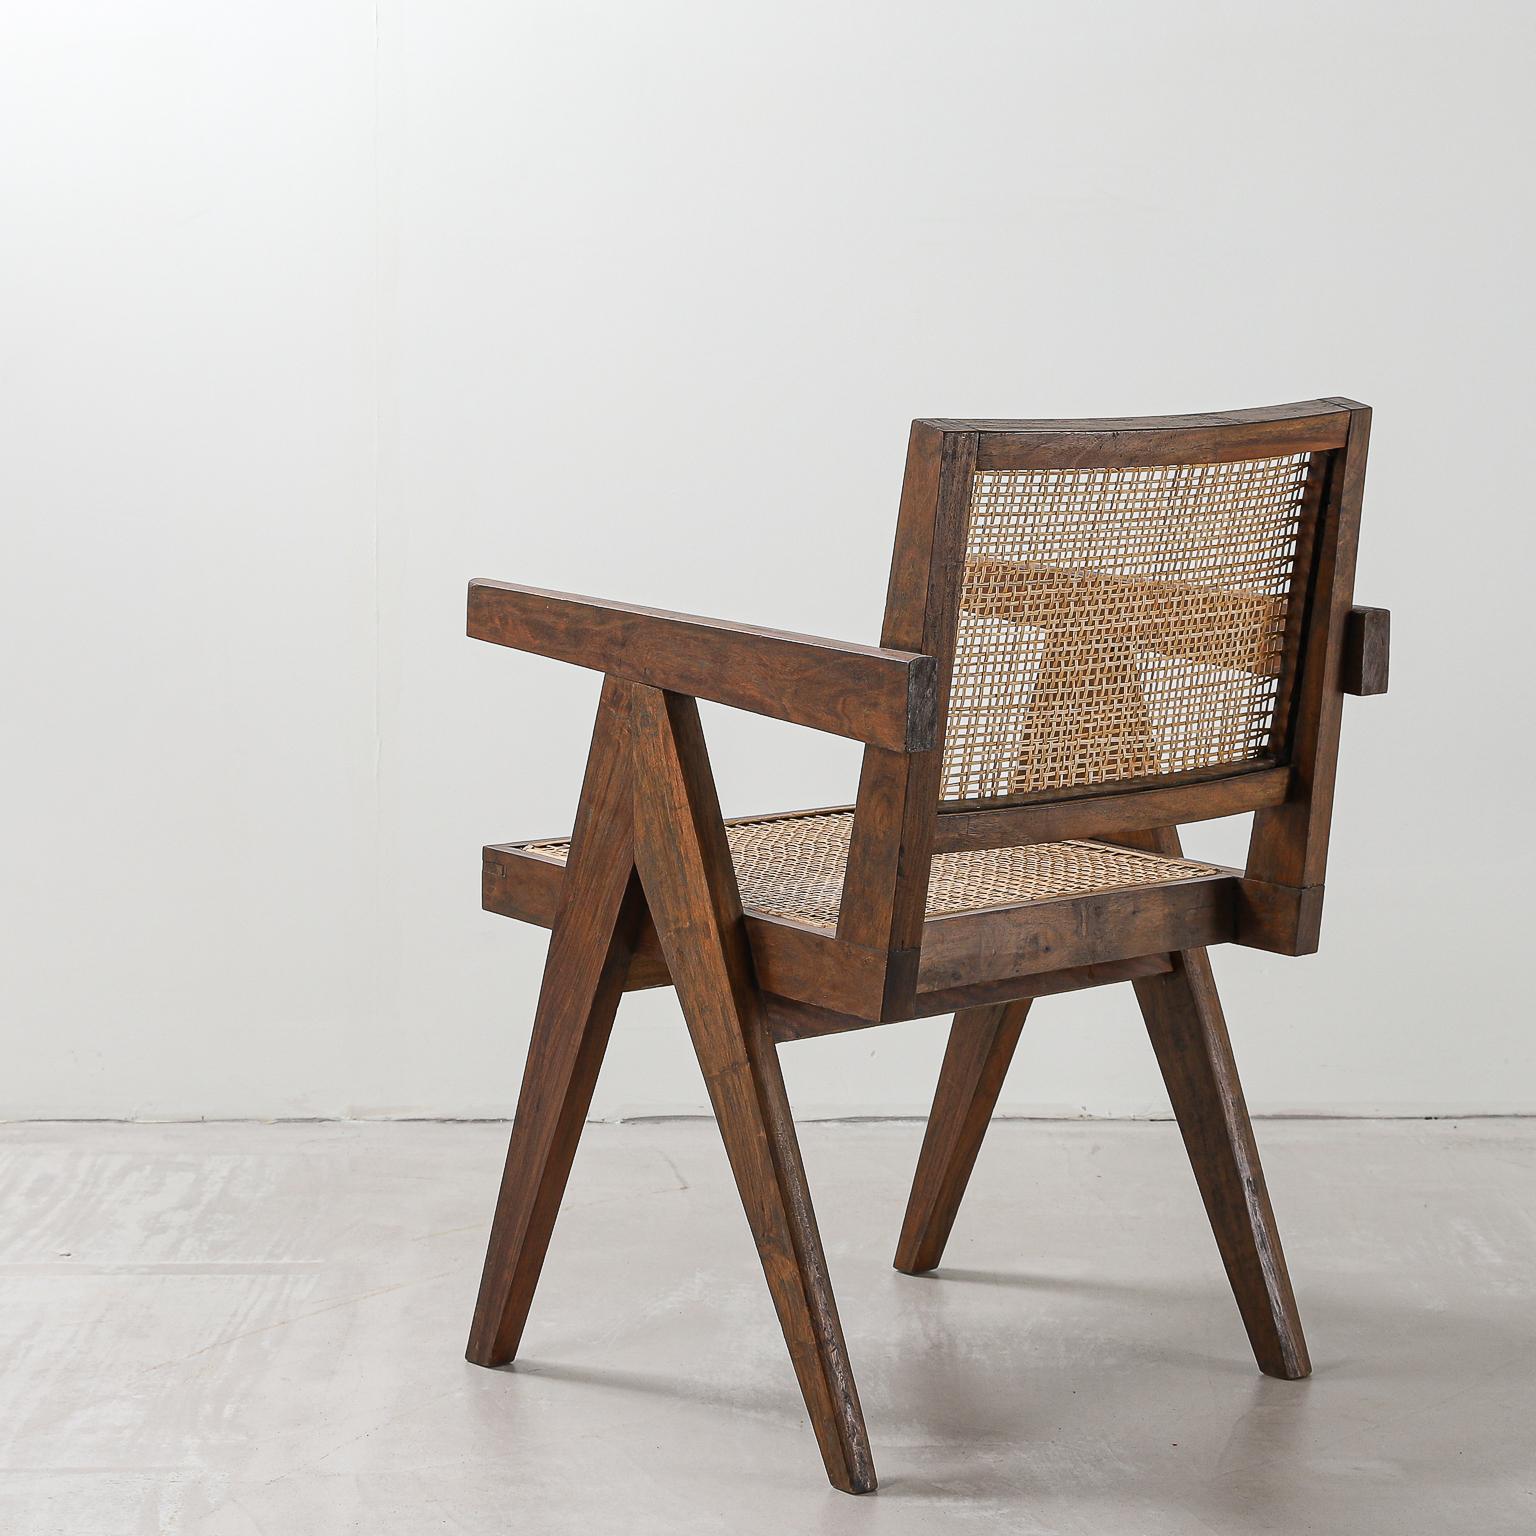 Rattan Set of 6 Pierre Jeanneret Office Chair, Variant, circa 1953-1954